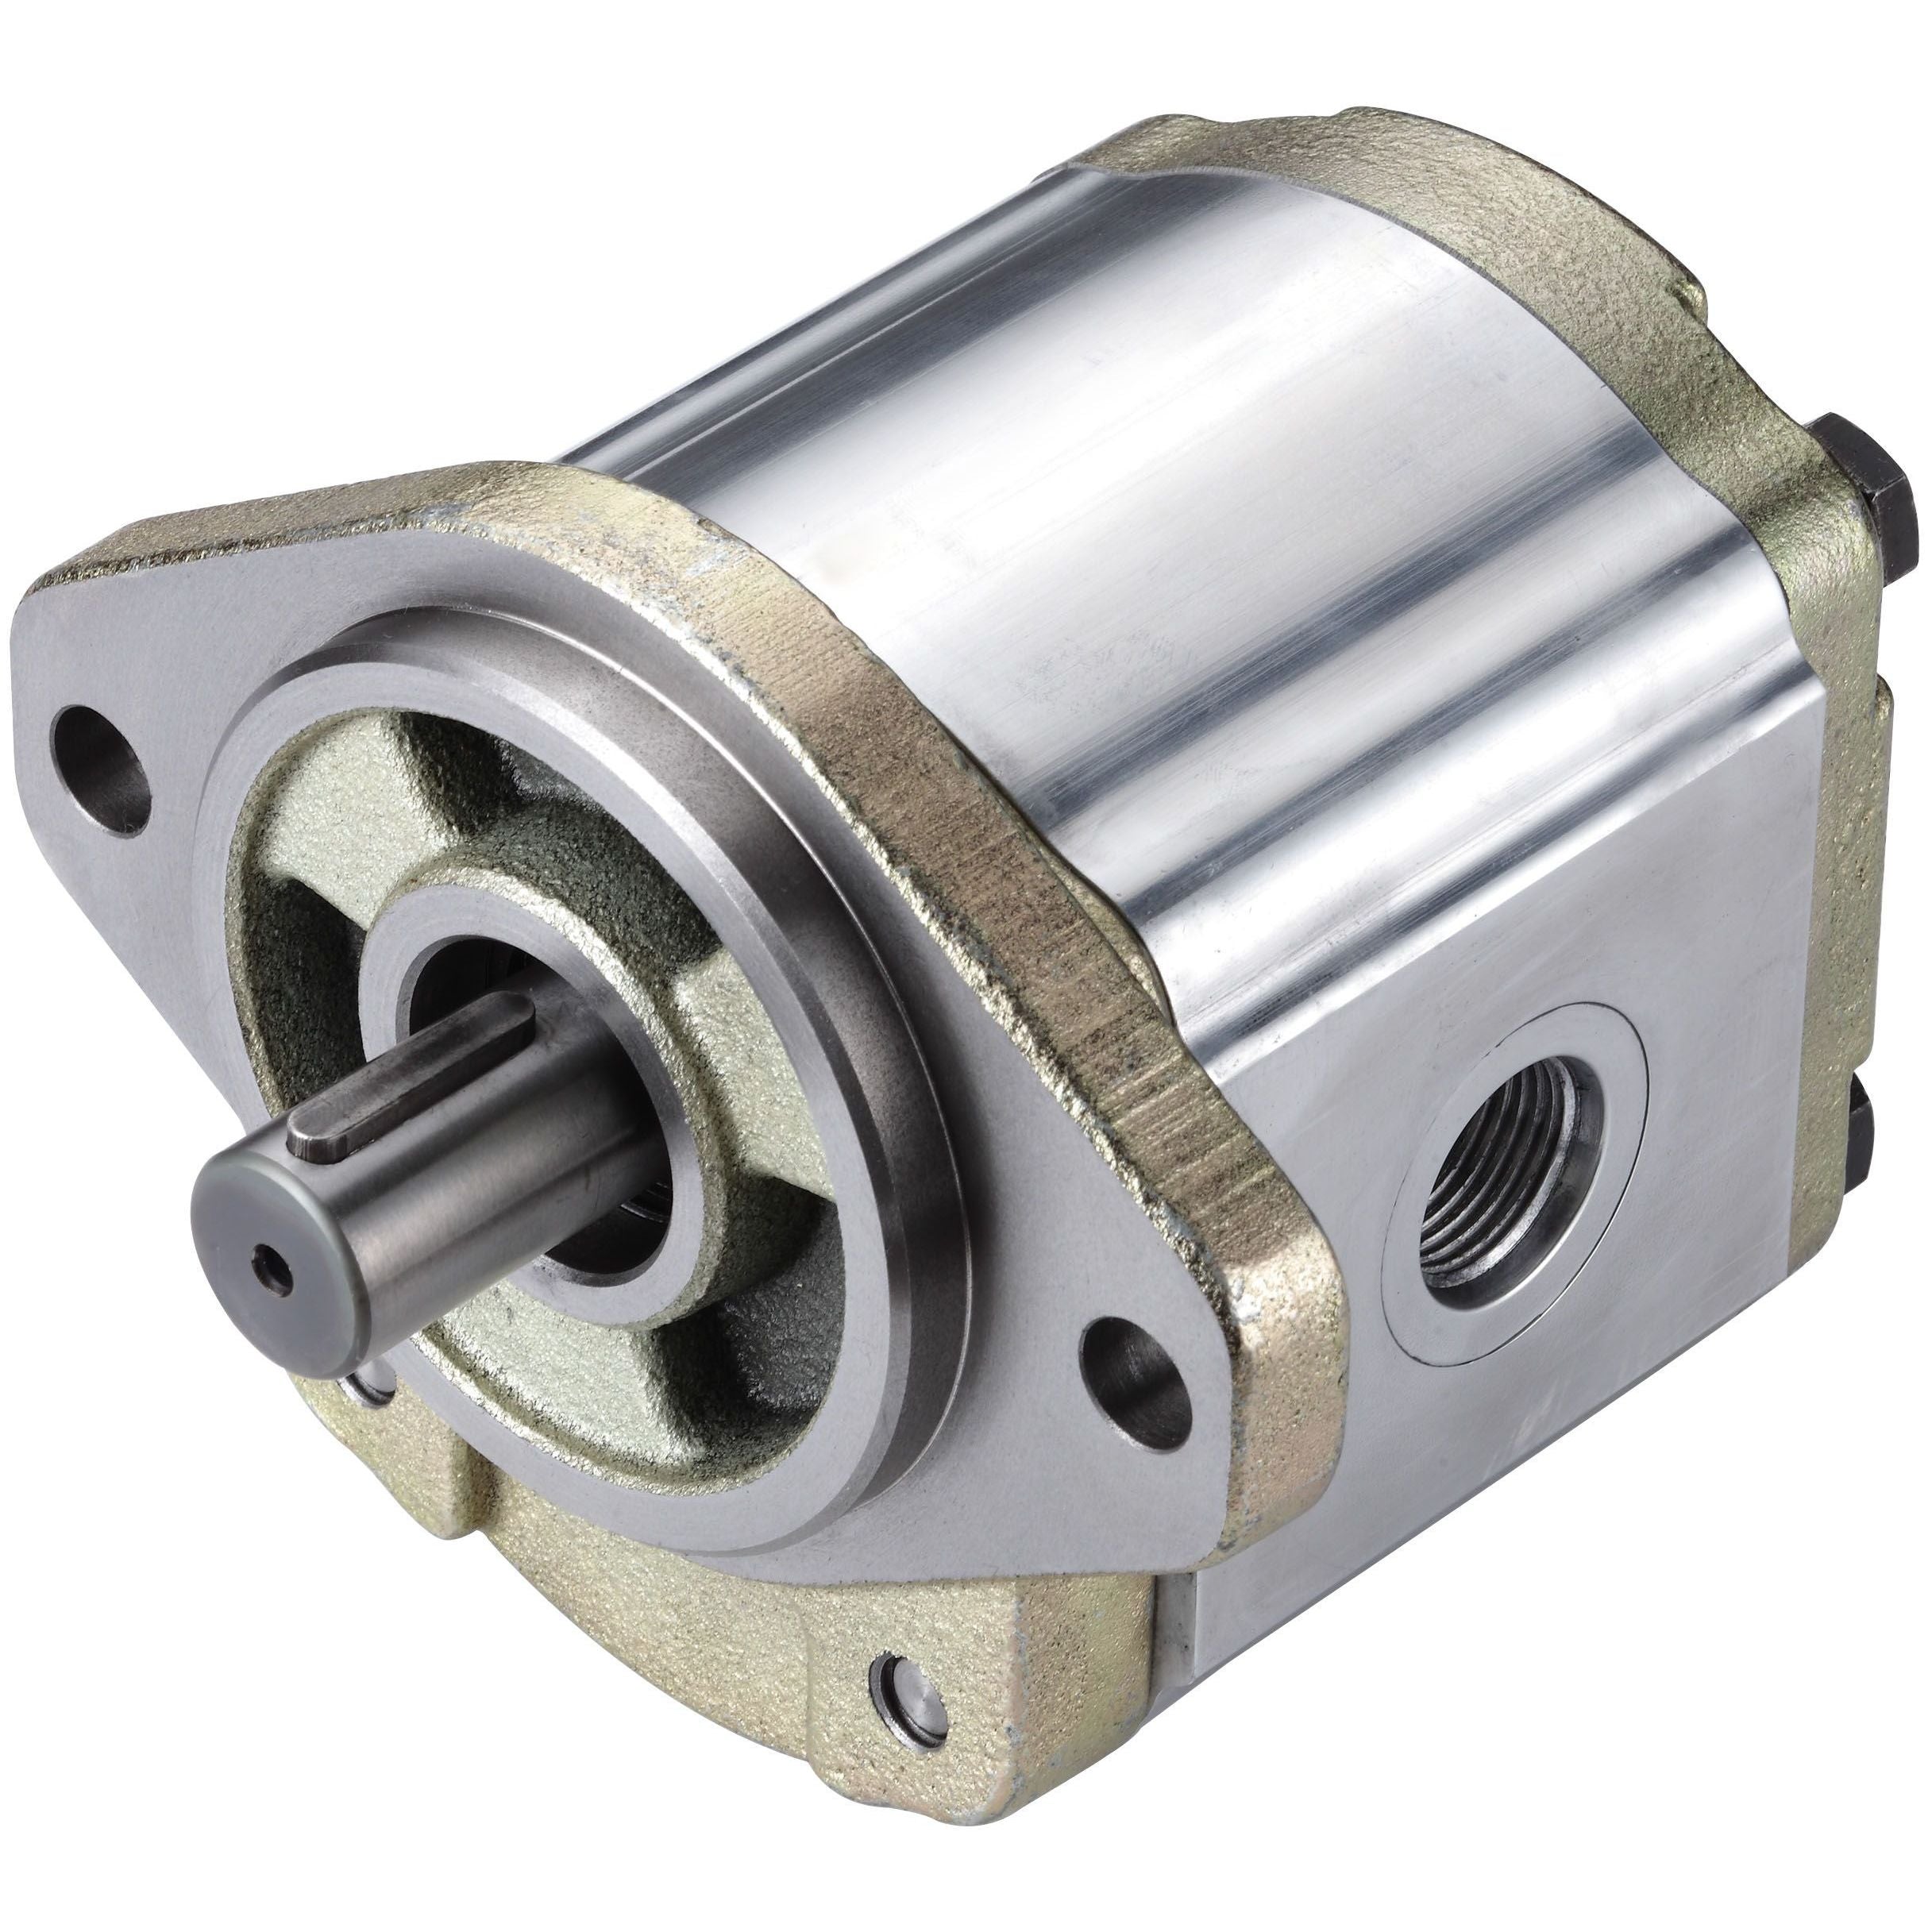 3GB8U228L : Honor Gear Pump, CCW Rotation, 28cc (1.71in3), 13.31 GPM, 3500psi, 3000 RPM, #20 SAE (1.25") In, #12 SAE (3/4") Out, Splined Shaft 13-Tooth, 16/32 Pitch, SAE B 2-Bolt Mount